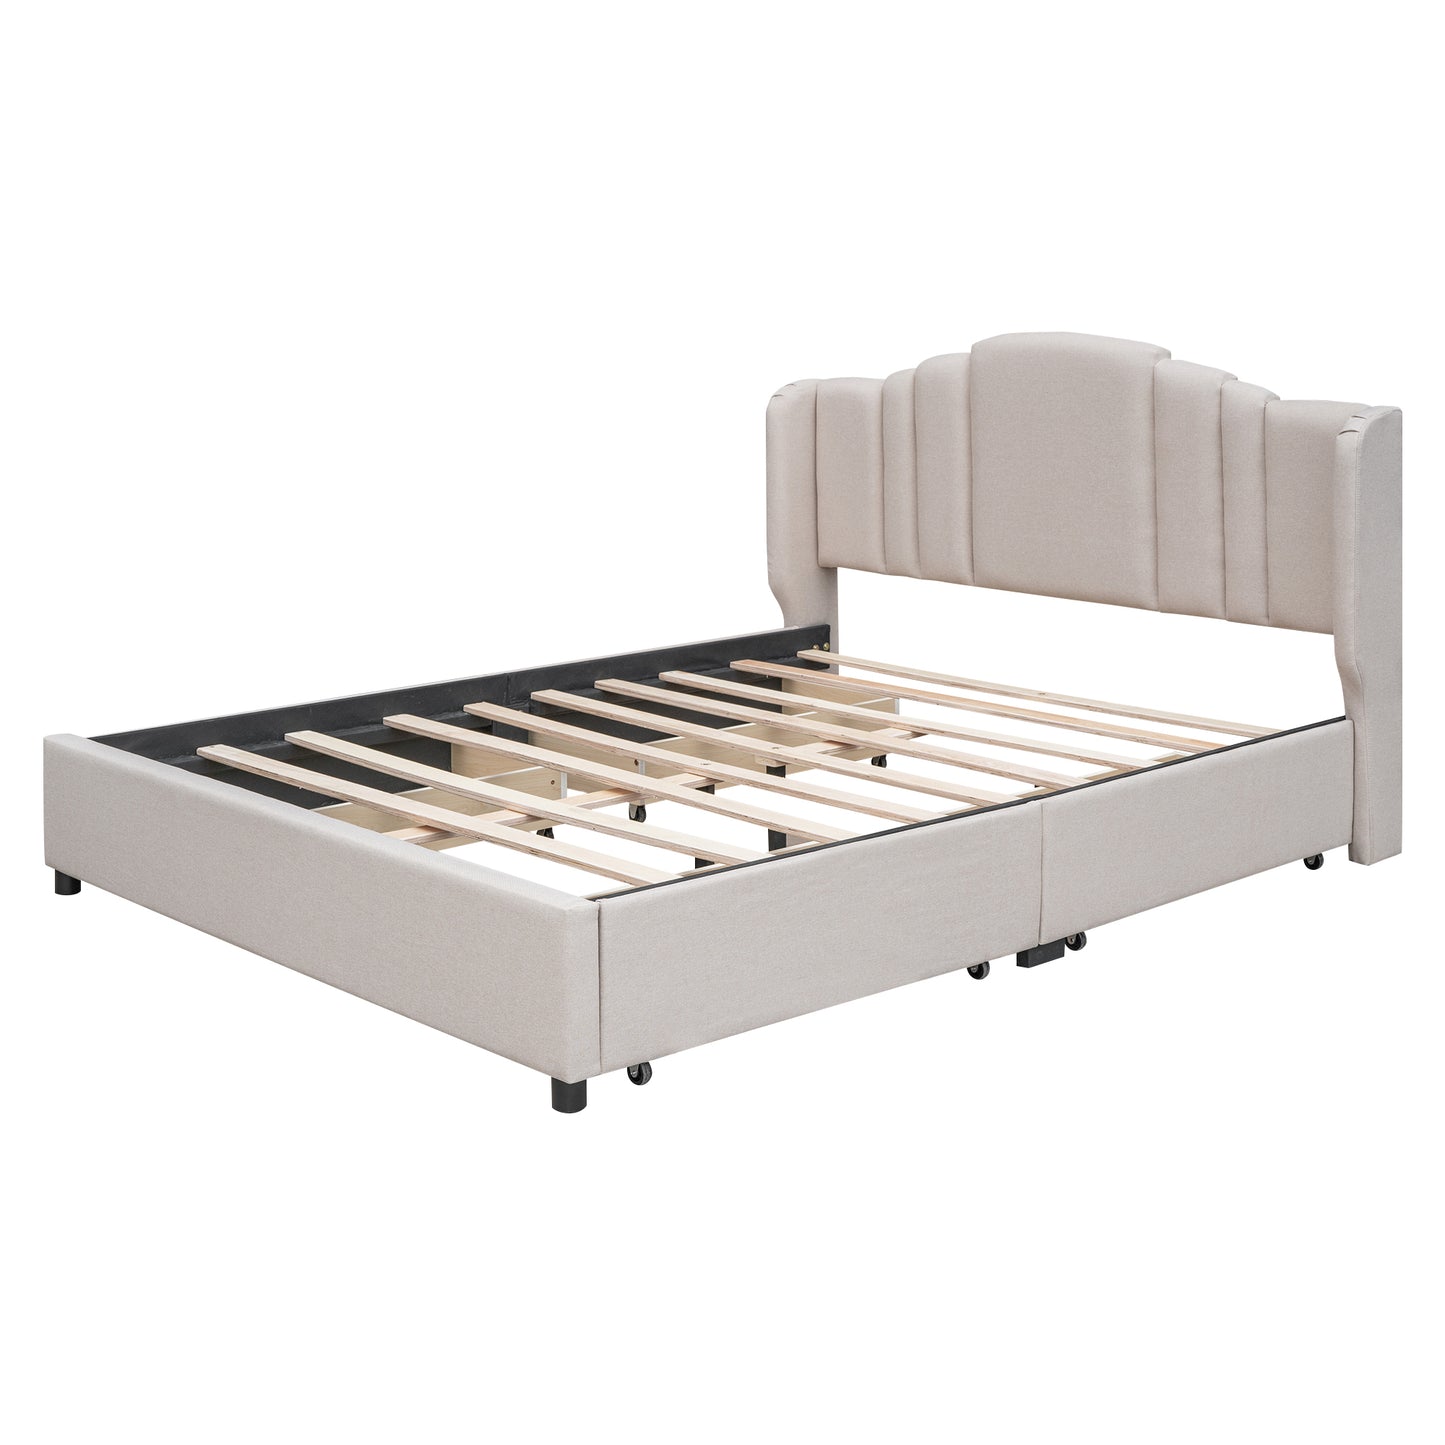 Upholstered Platform Bed with Wingback Headboard and 4 Drawers, No Box Spring Needed, Linen Fabric, Queen Size Beige